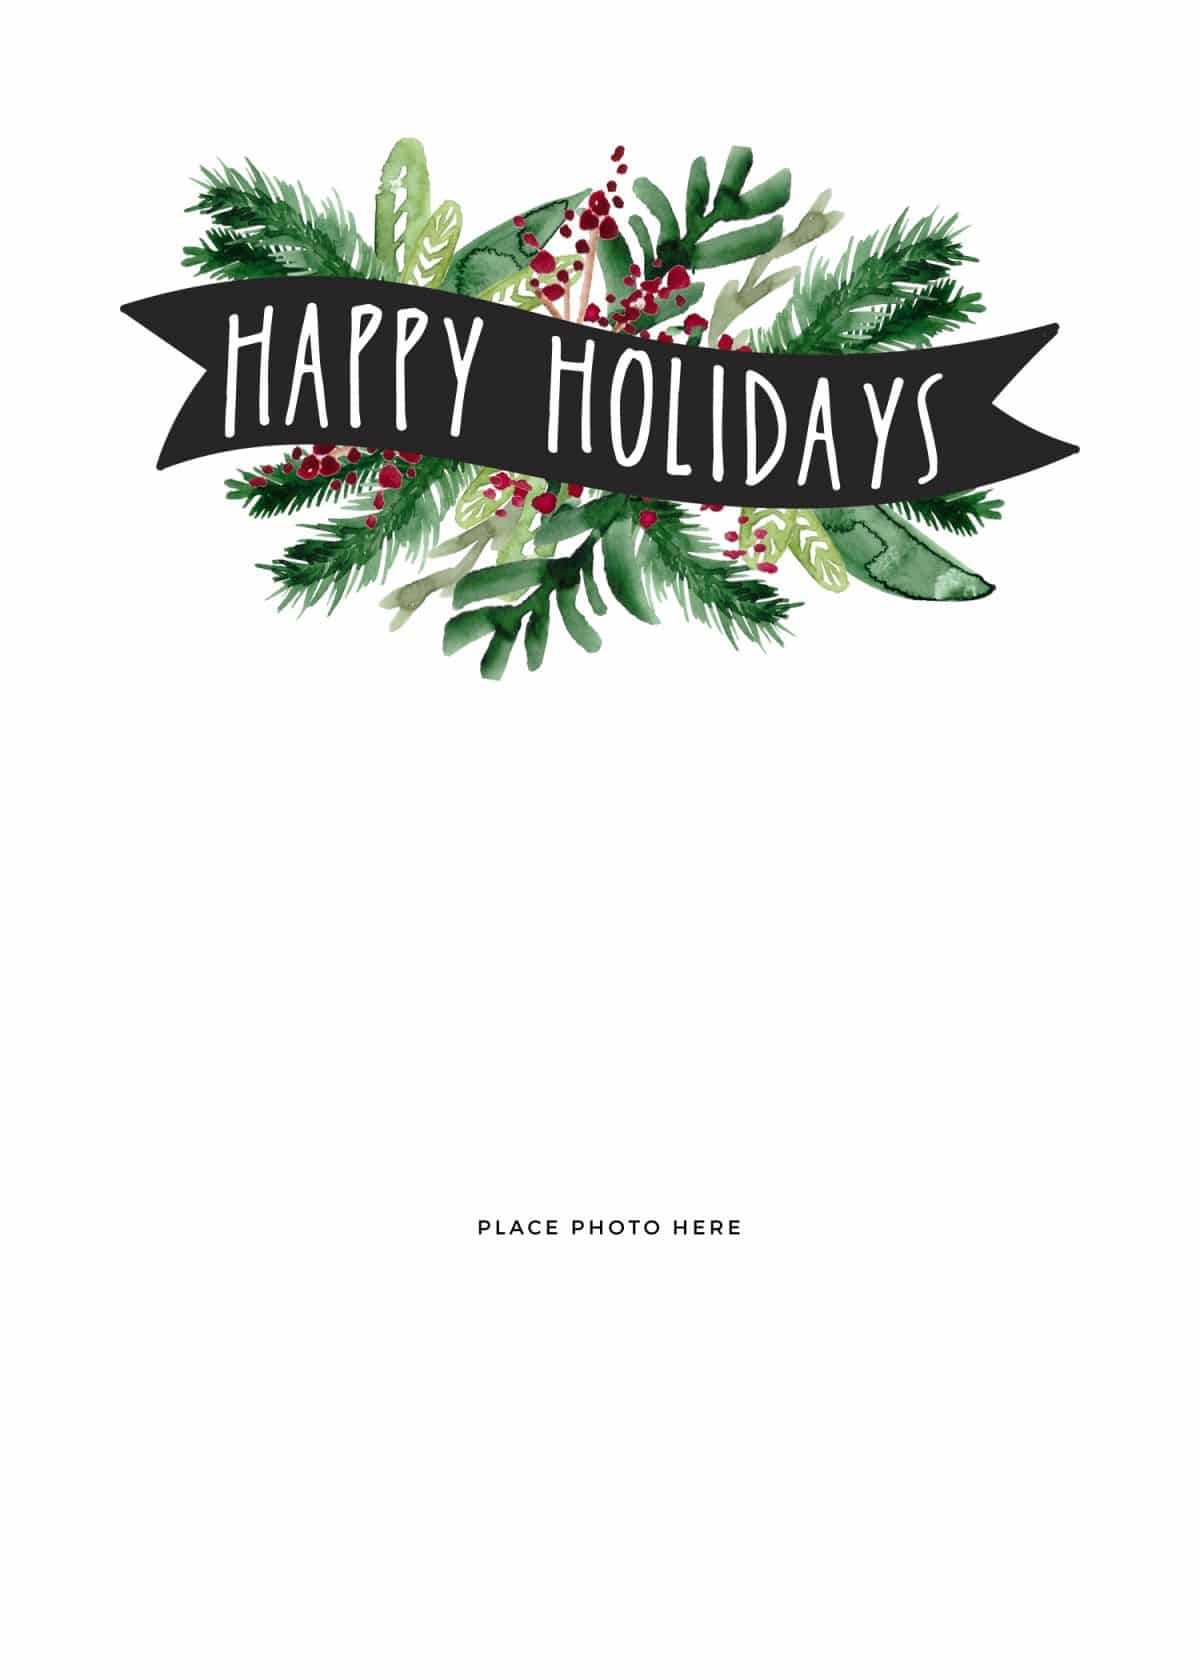 Make Your Own Photo Christmas Cards (For Free!) - Somewhat With Free Holiday Photo Card Templates